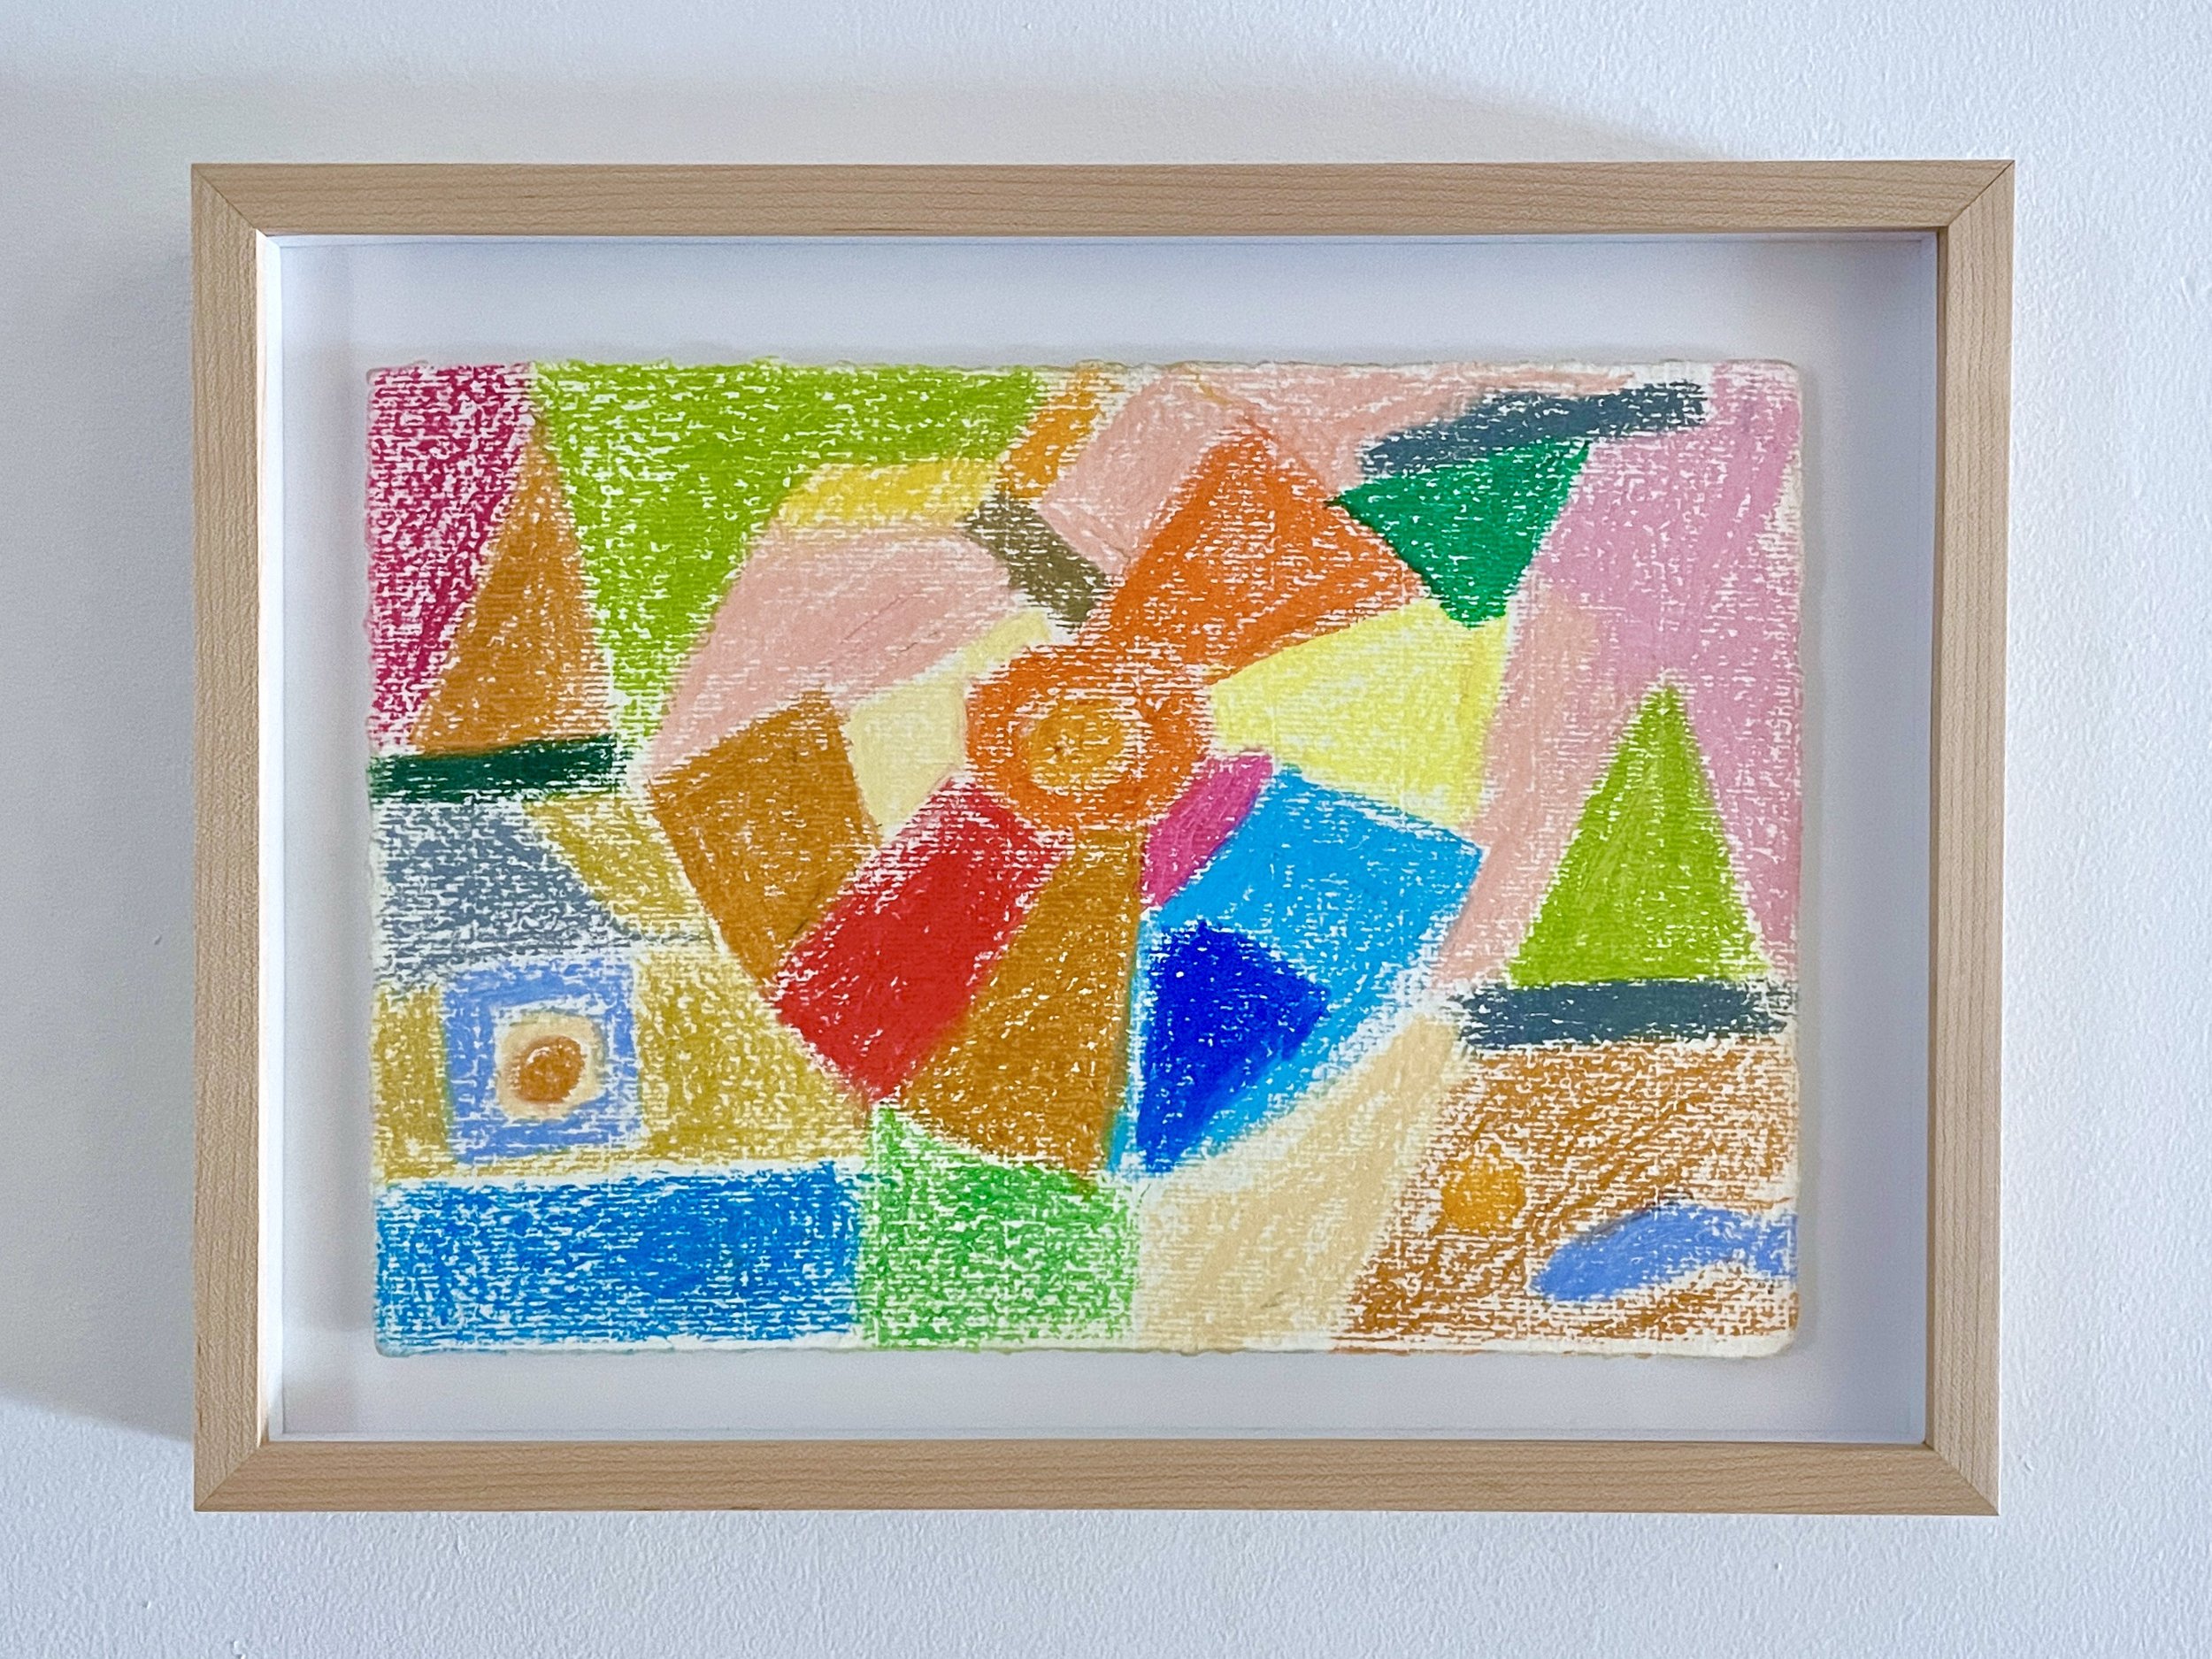   Untitled , 2020. Crayon on paper, 8 × 12 in. Sketch for a ceramic mural, catalogue raisonné number D98. Courtesy of the estate of the artist and Sfeir-Semler Gallery Beirut/Hamburg.  